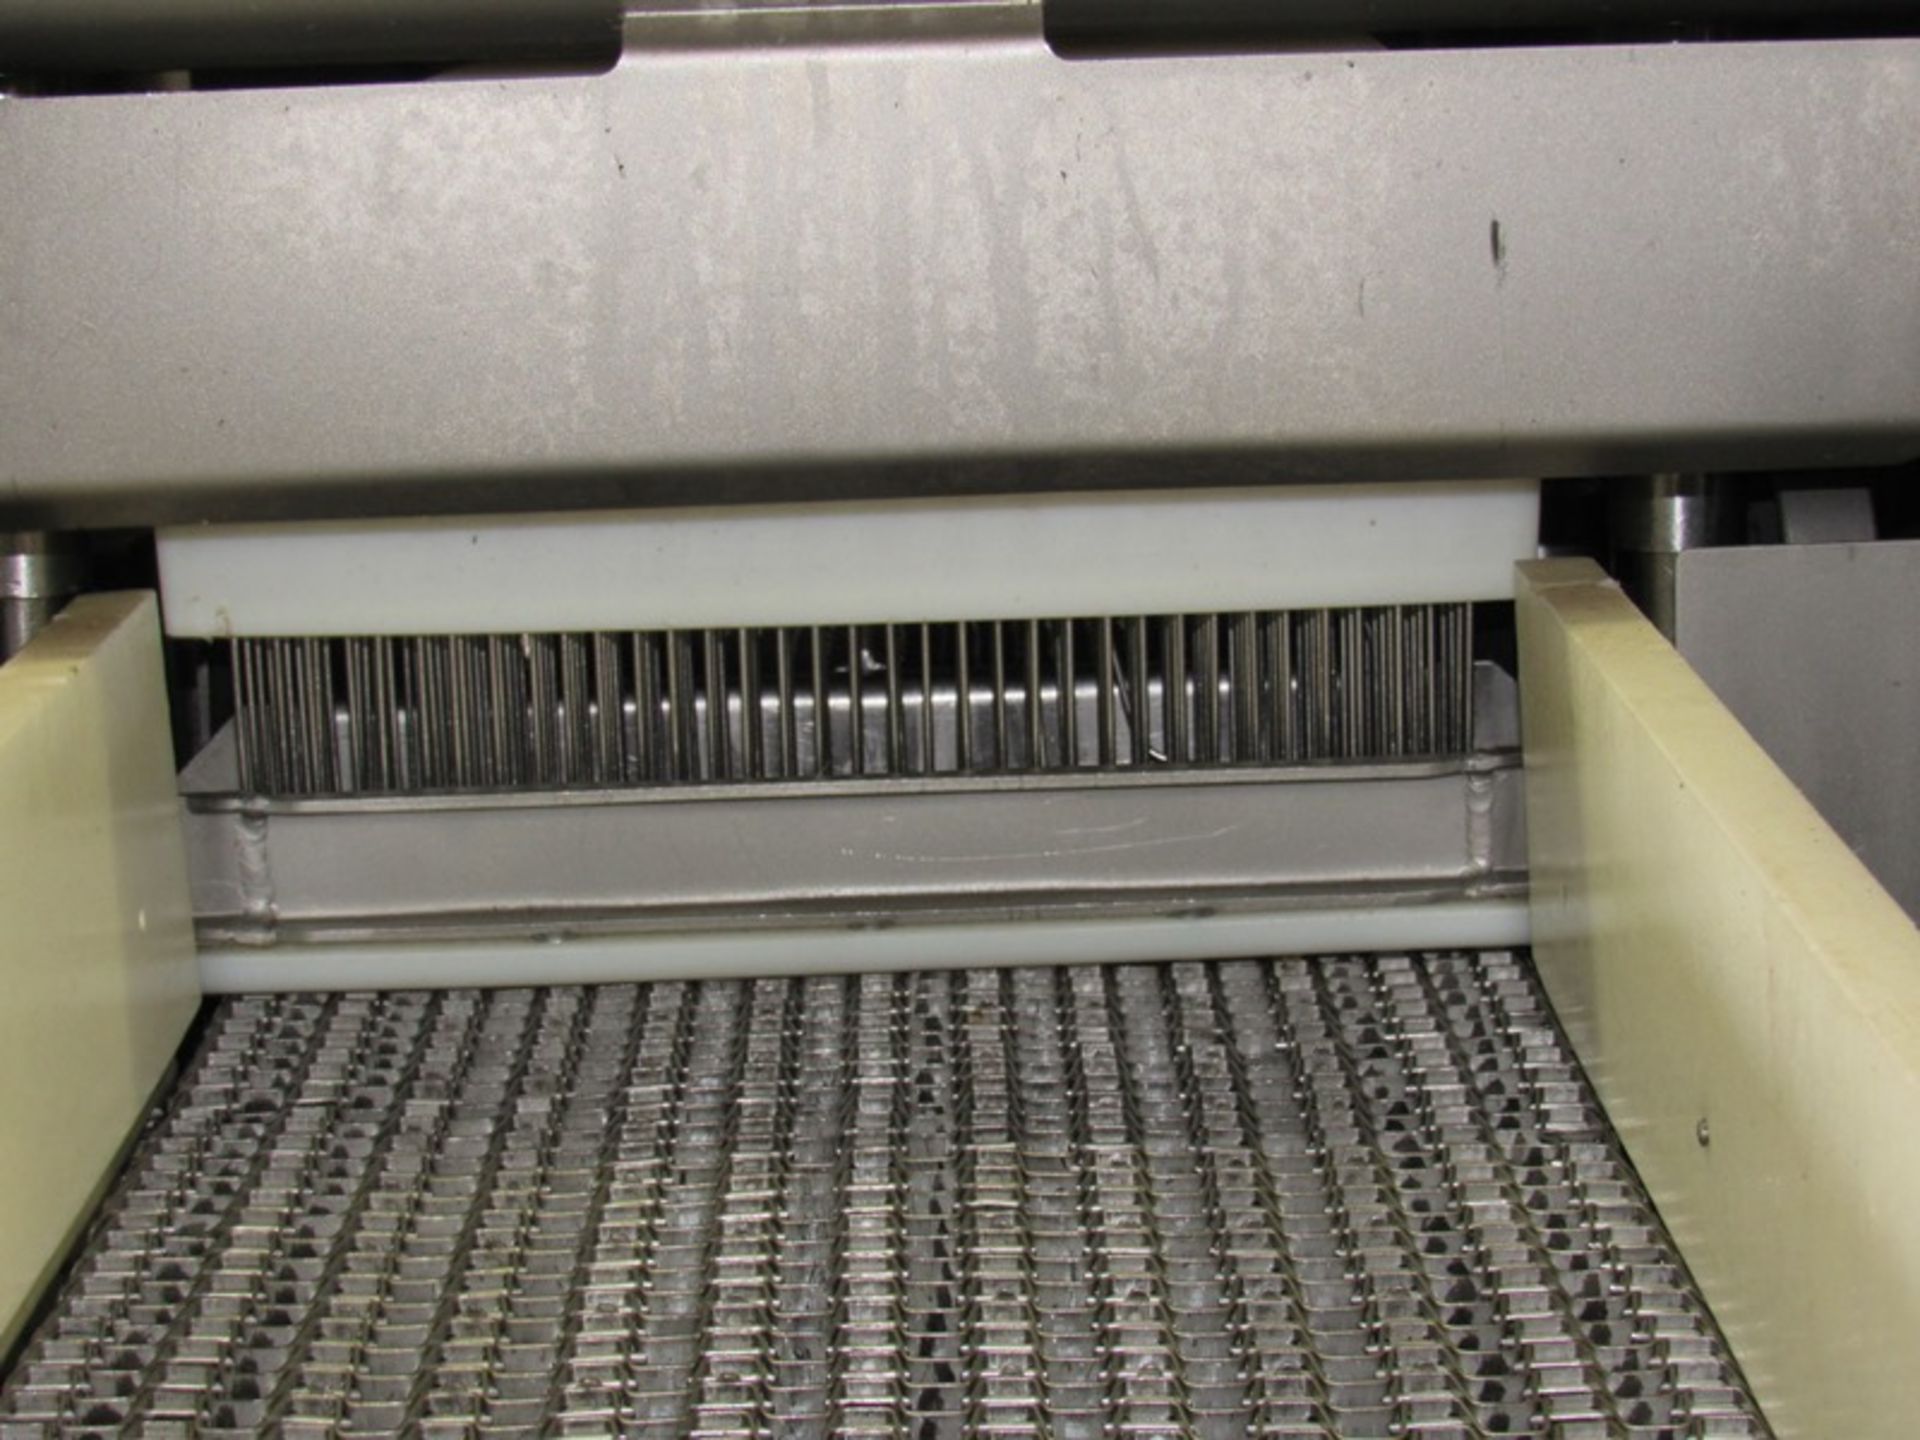 Townsend Mdl. 1450 Injector, 170 needle, 14" W X 6' H stainless steel belt conveyor with stainless - Image 6 of 18